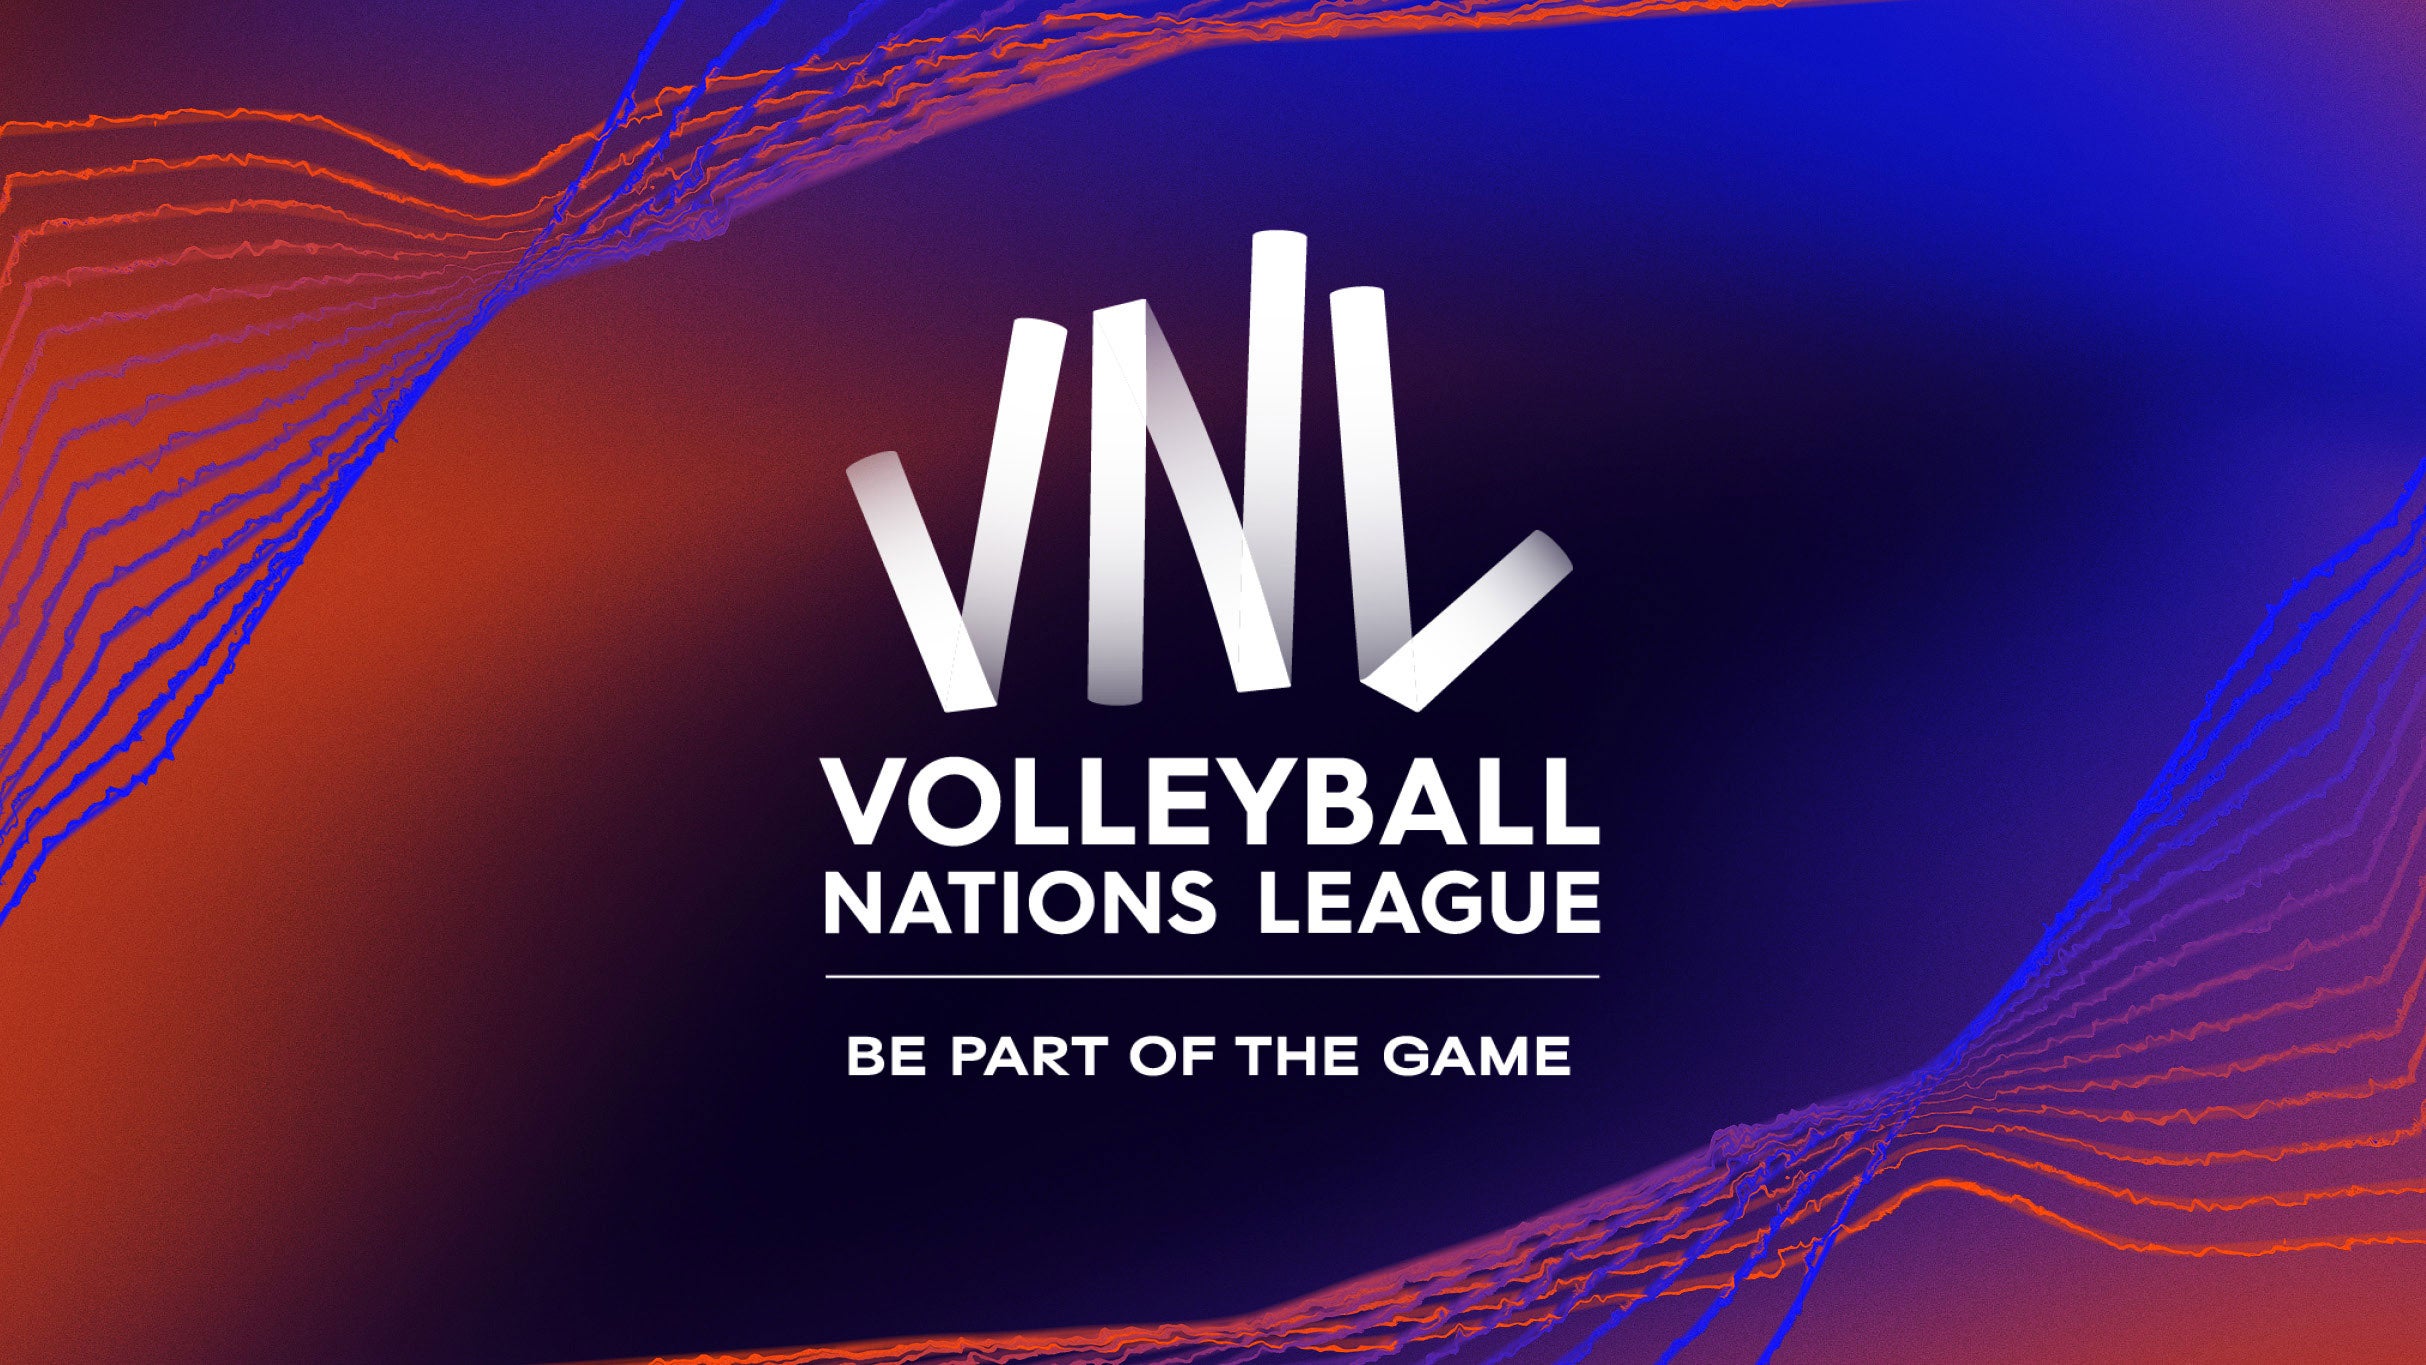 Volleyball Nations League - Match Day 1